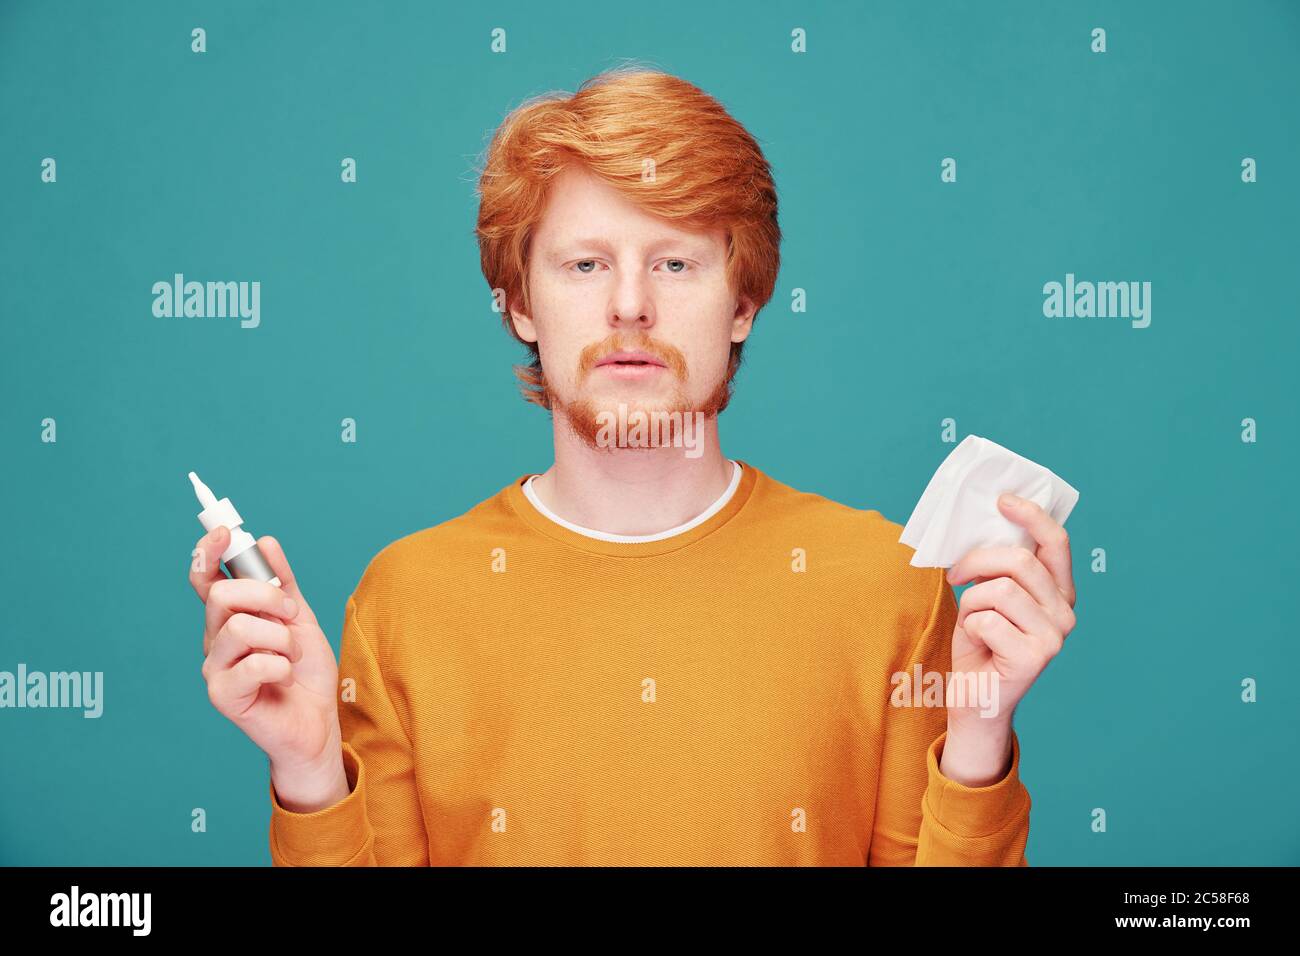 Allergic young man with red beard having stuffy noses and using nasal spray and napkin, blue background Stock Photo